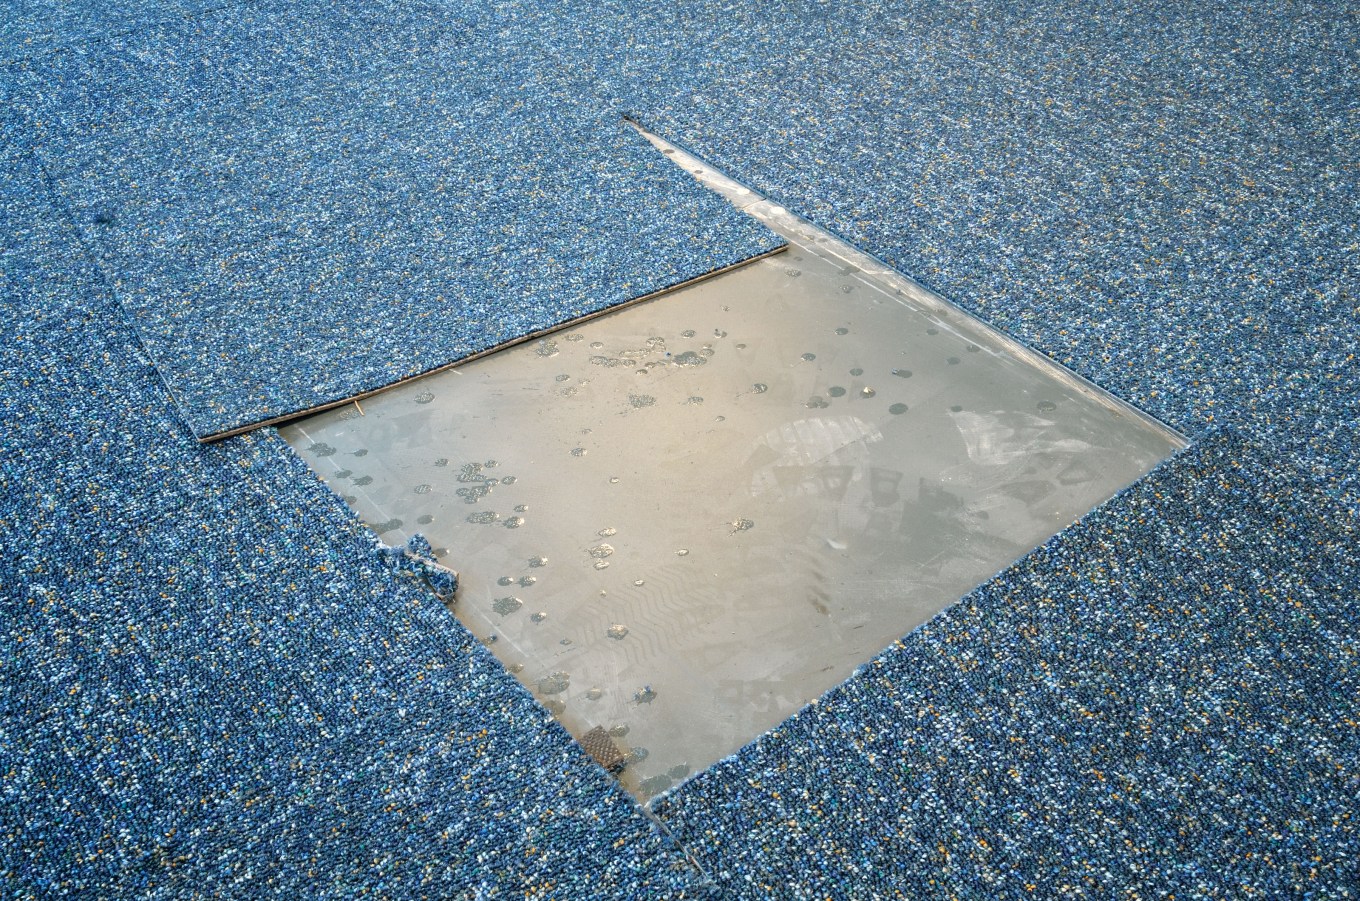 A square section of a blue carpet cut out in the course of carpet installation.